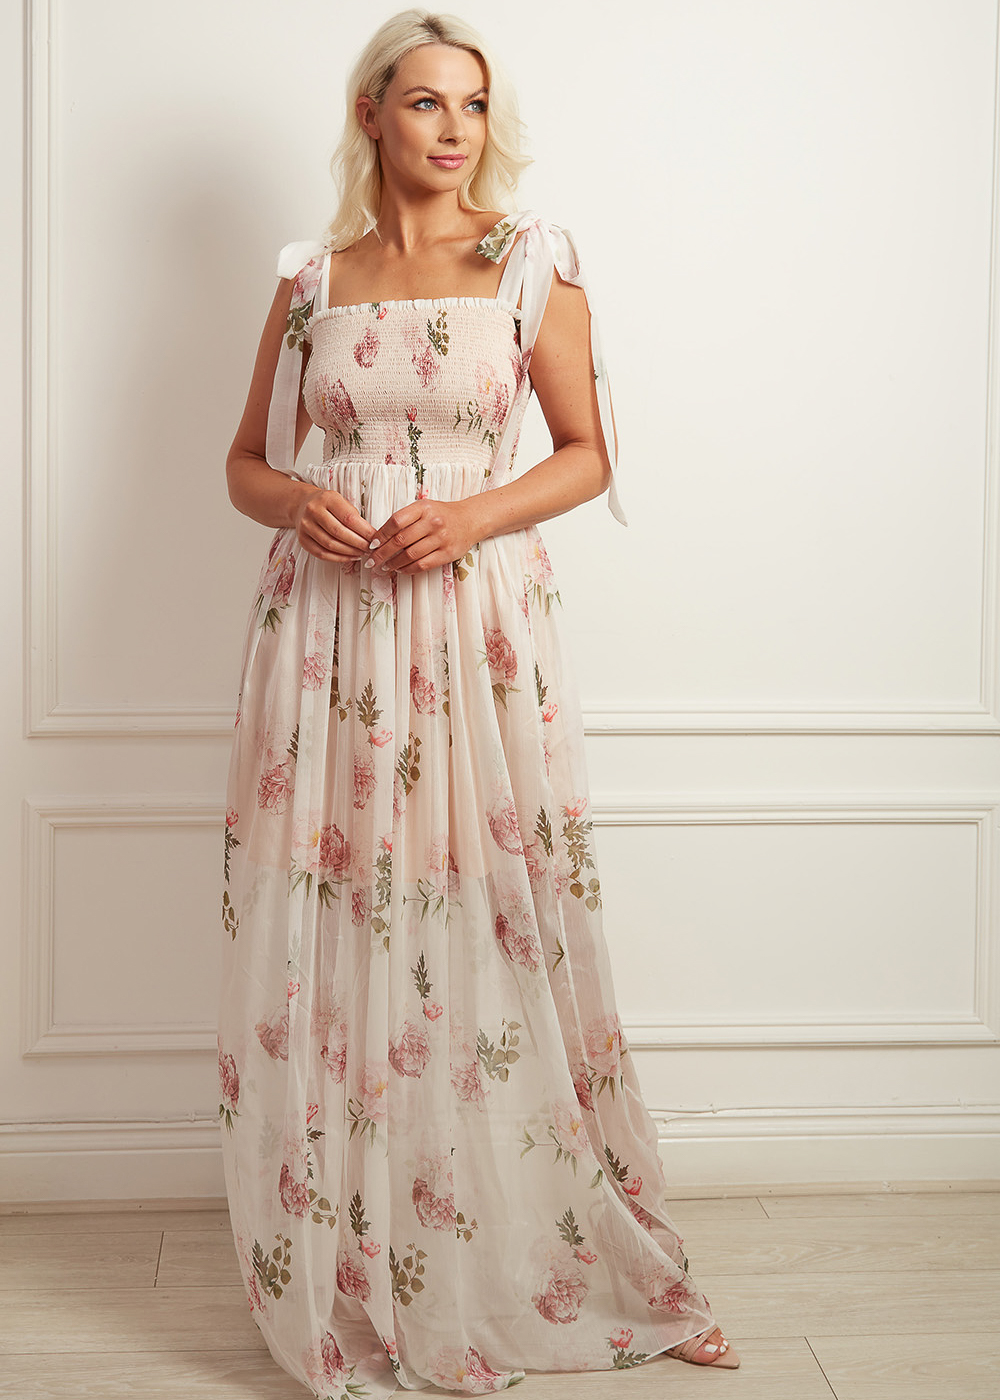 White printed chiffon maxi dress with tie shoulder straps and a shirred bodice